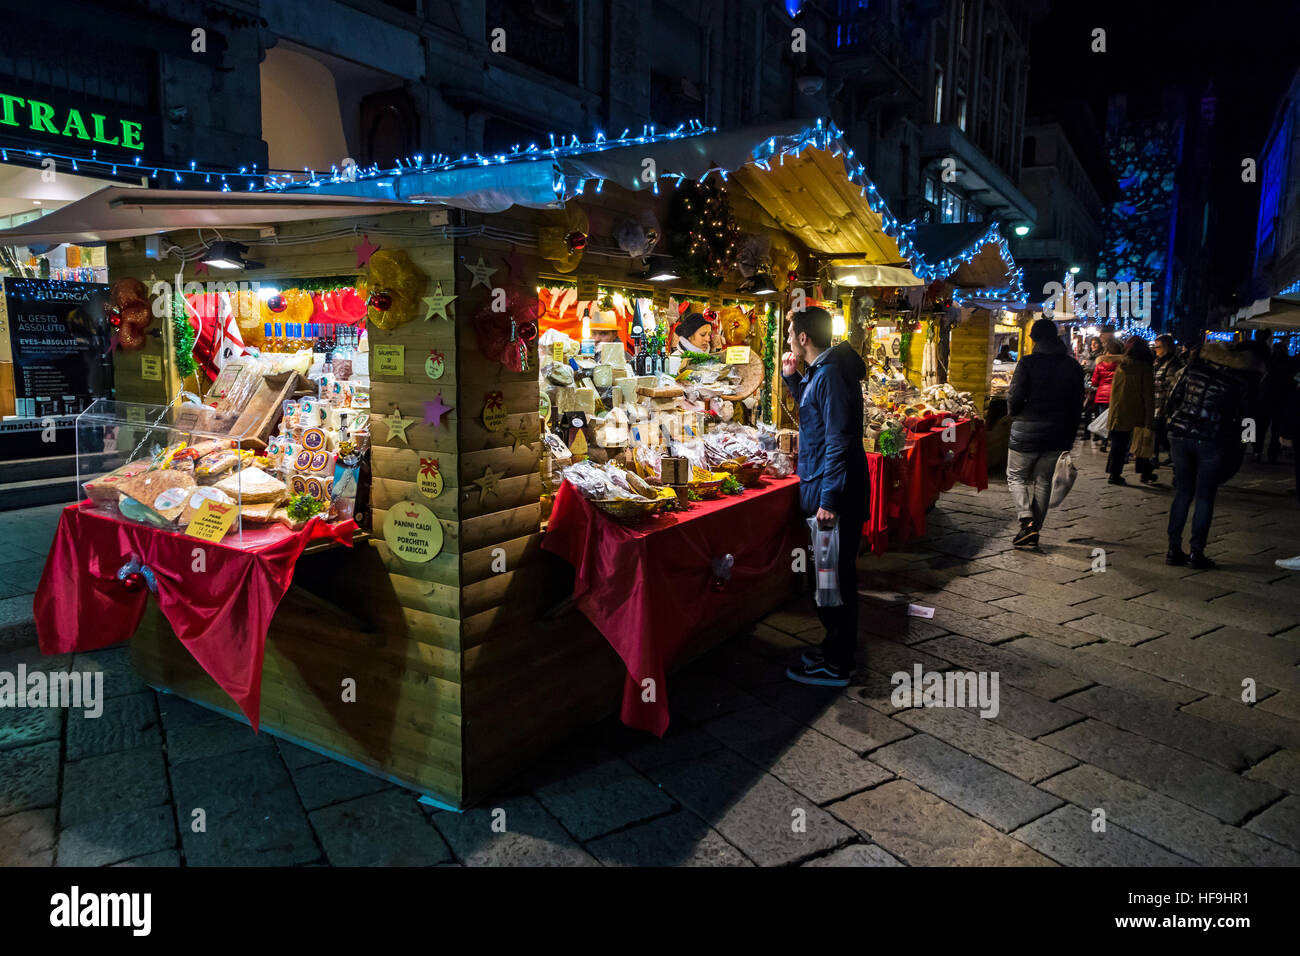 Kiosks with local food and gifts in annual traditional Christmas fair on Piazza Cavour in center of Como, Lombardy, Italy Stock Photo